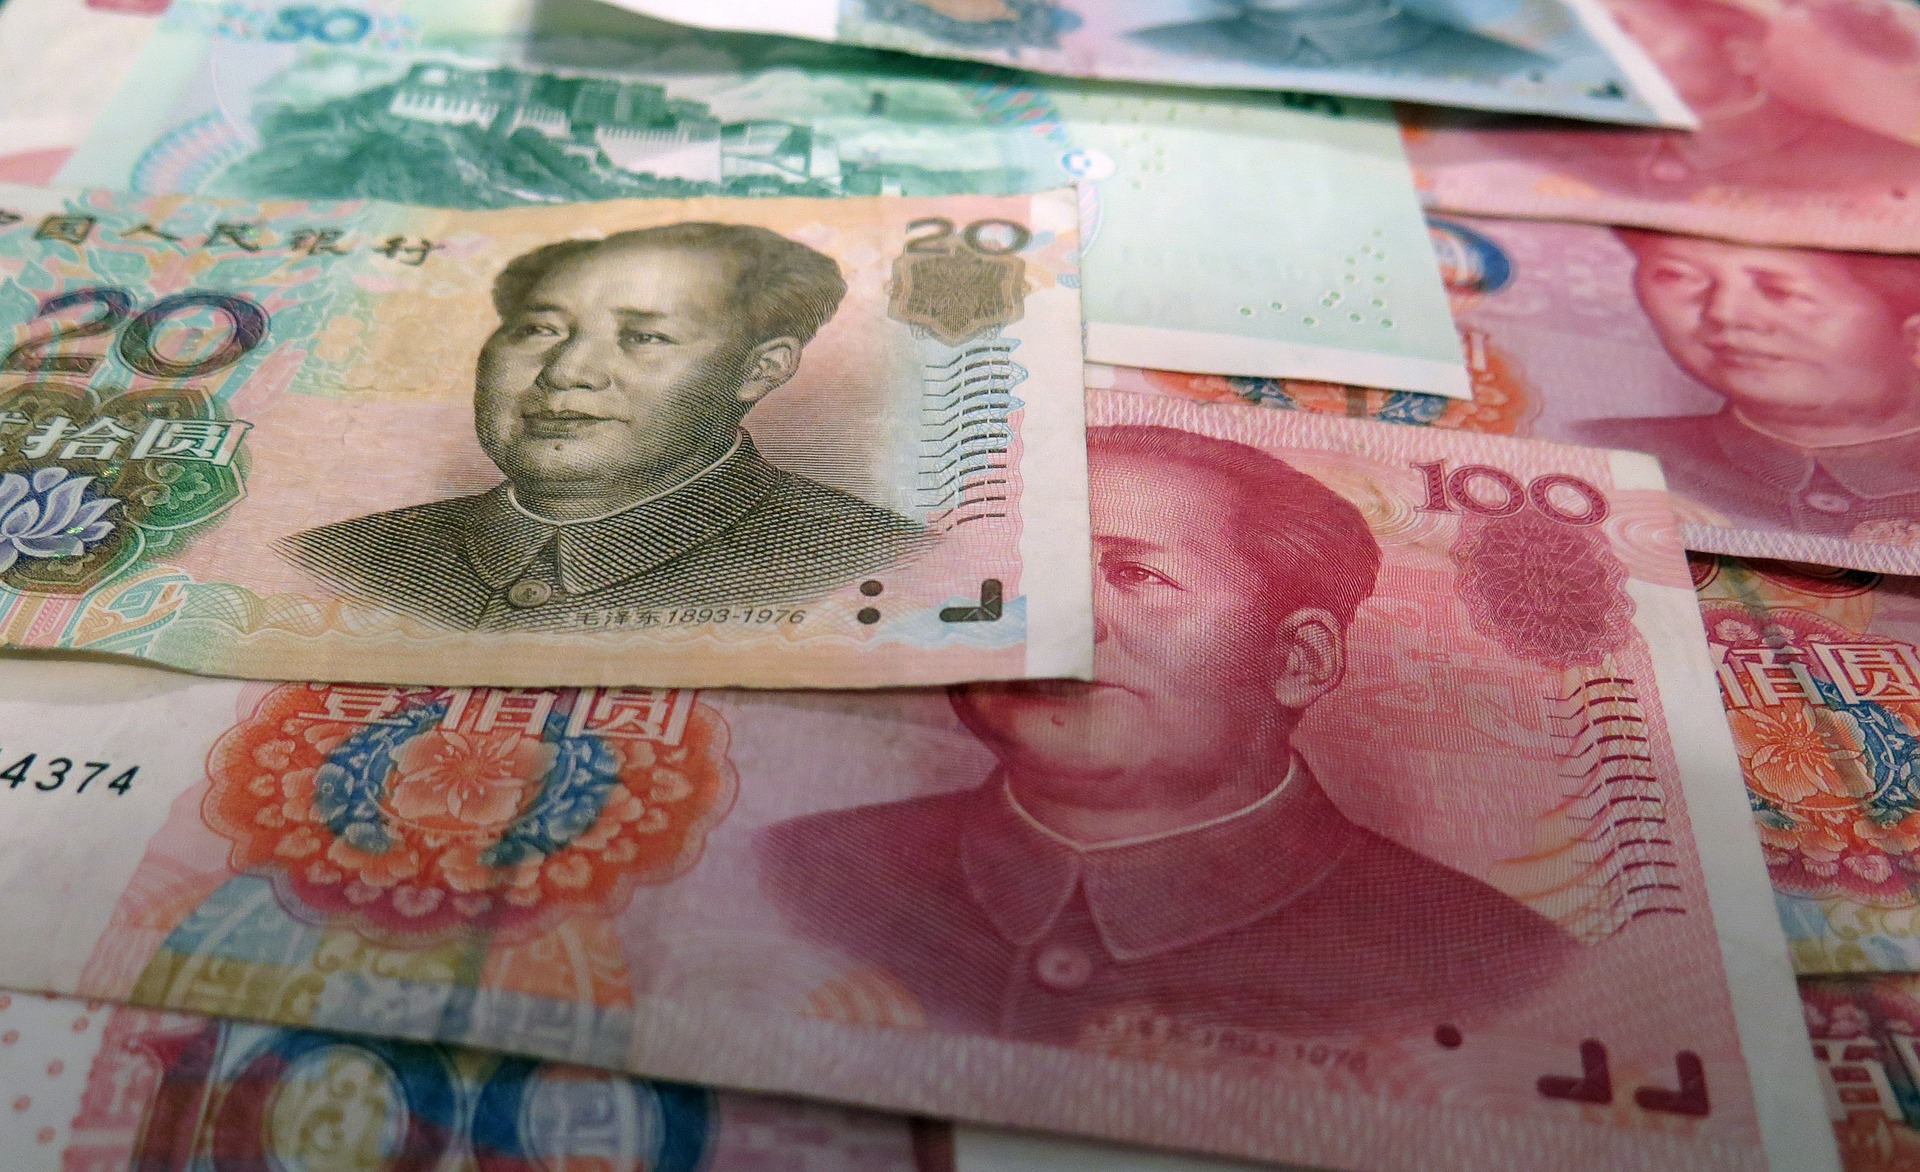 China and the SDR: Financial Globalization Through the Back Door